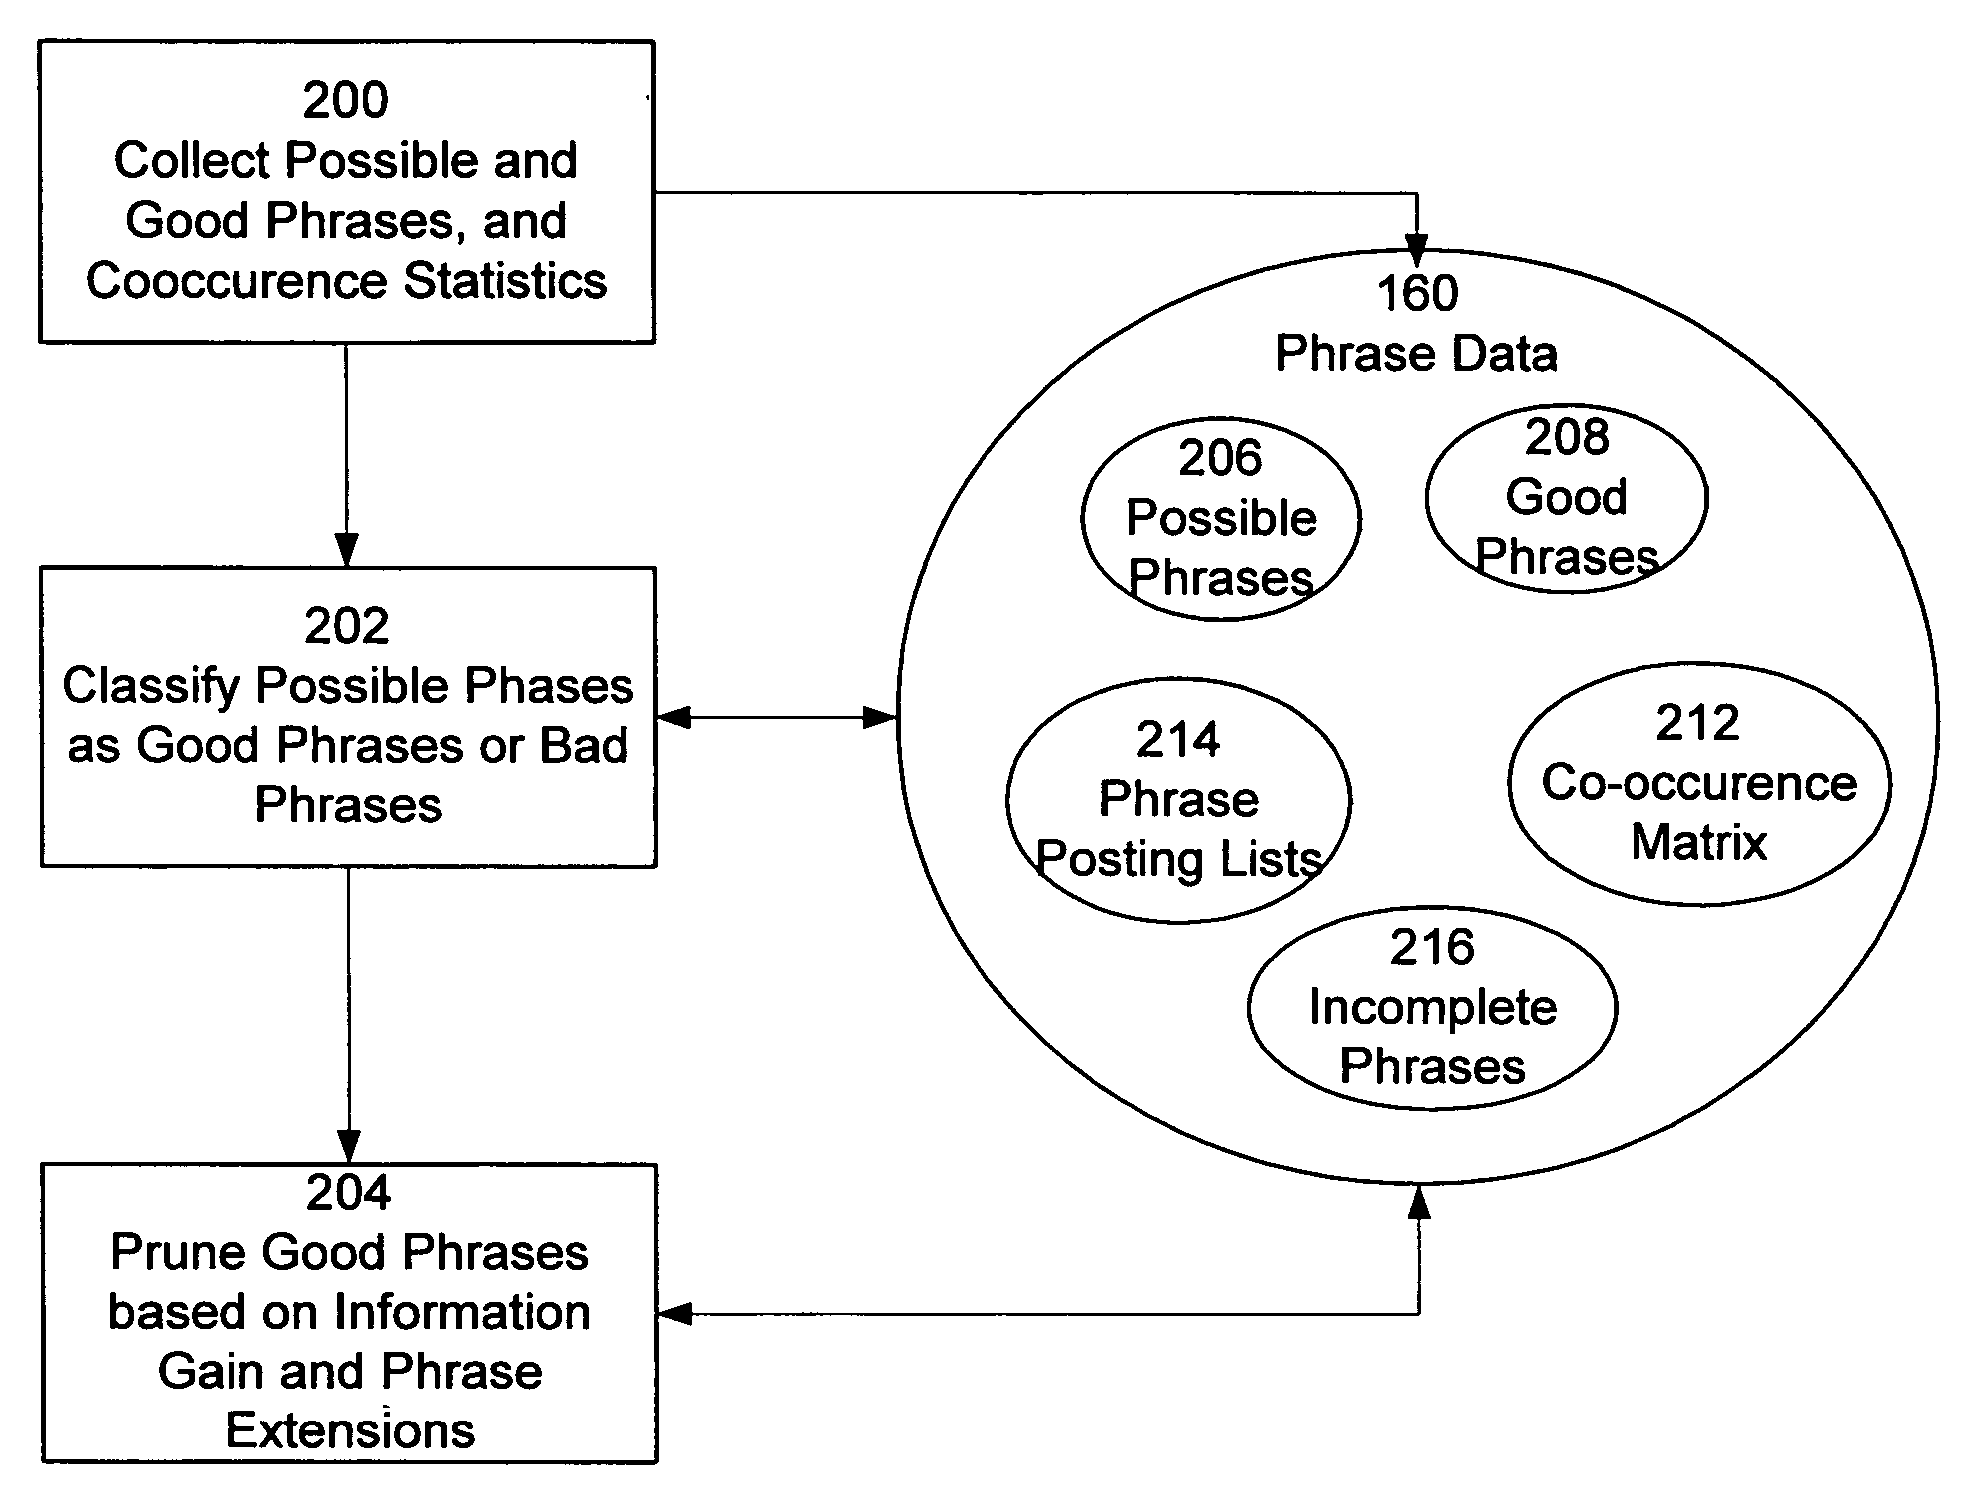 Phrase-based searching in an information retrieval system